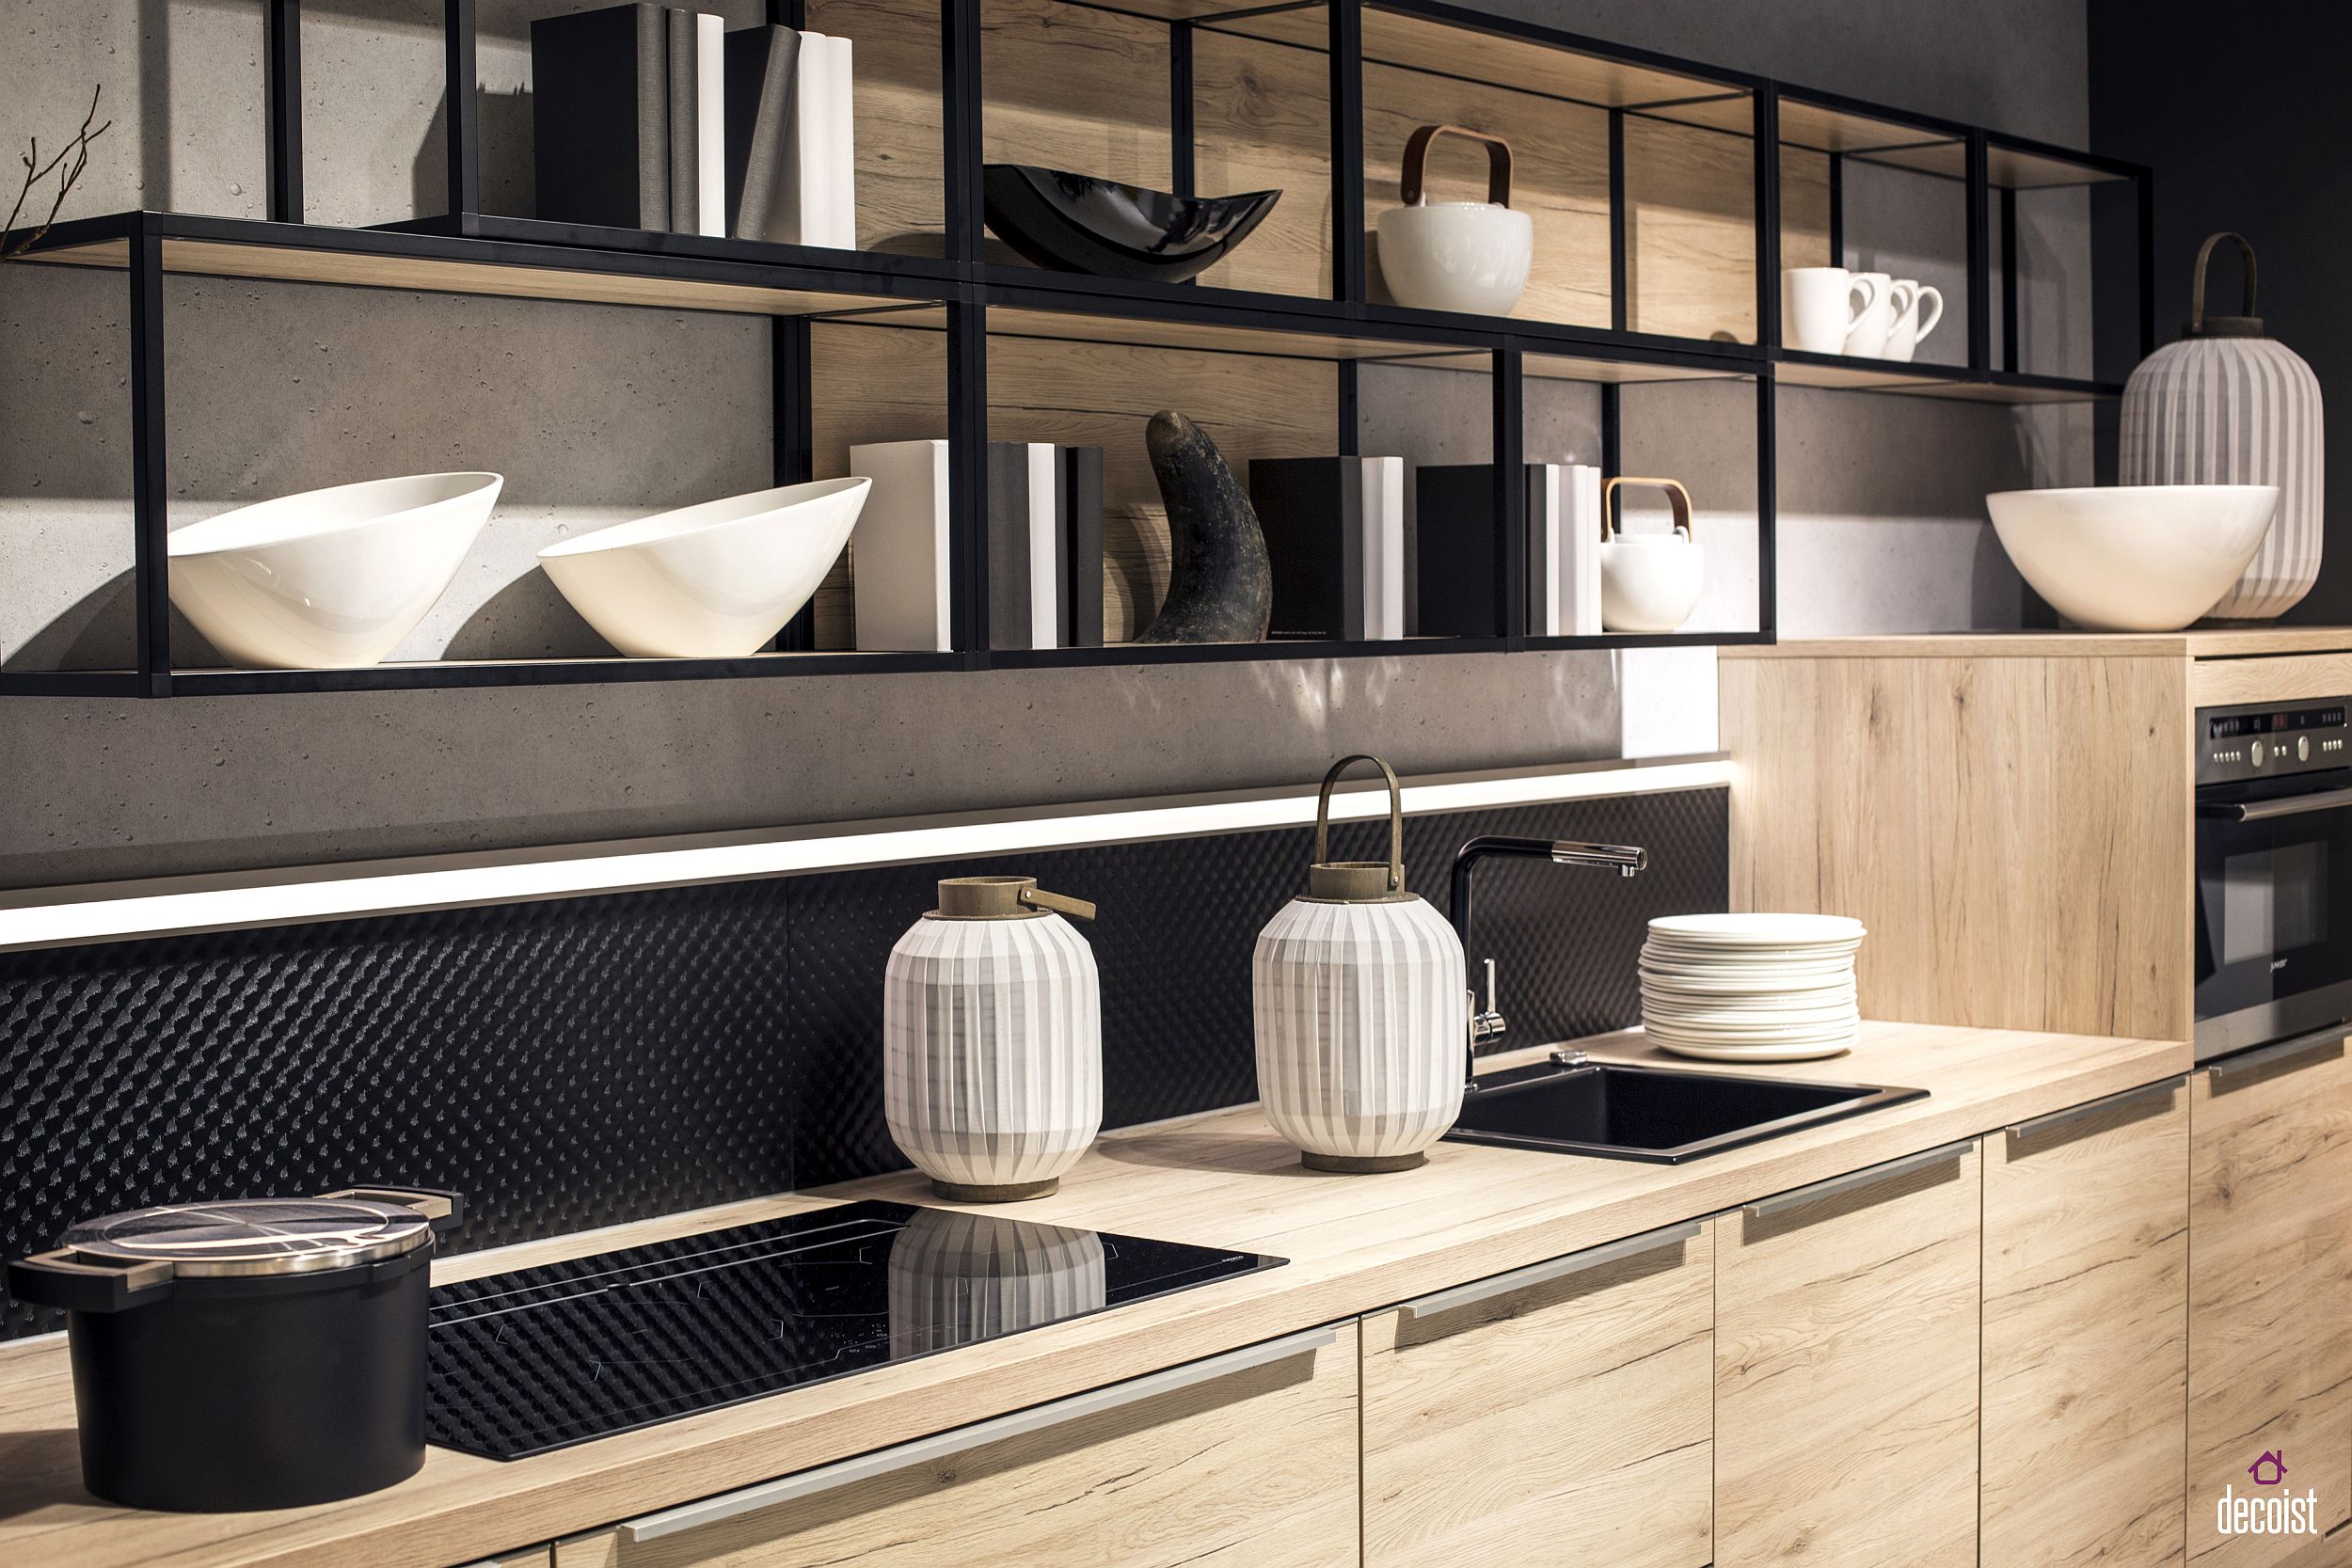 Black metallic frame gives these kitchen shelves a modern industrial style